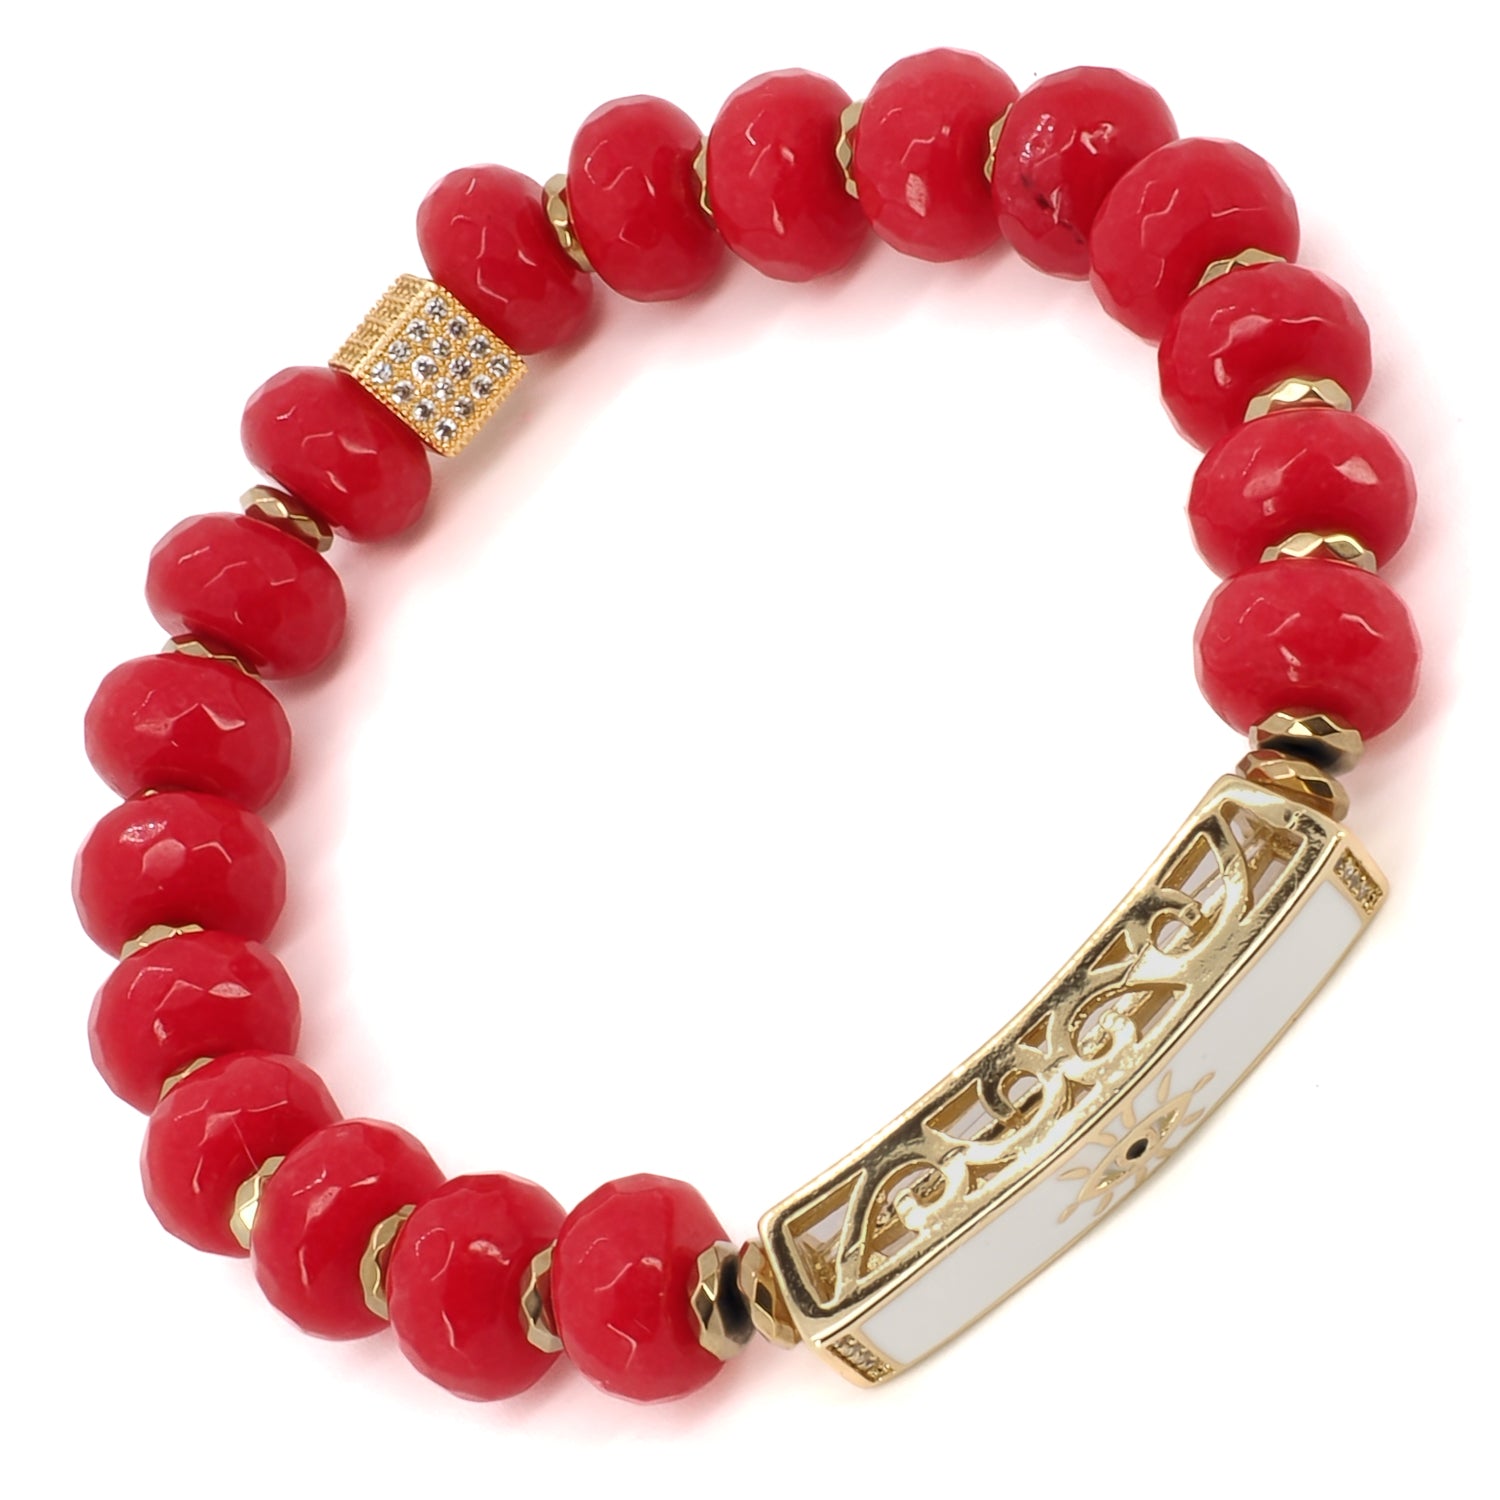 Adorn your wrist with the Red Energy Evil Eye Bracelet, a stylish and meaningful accessory designed for meditation and daily life.